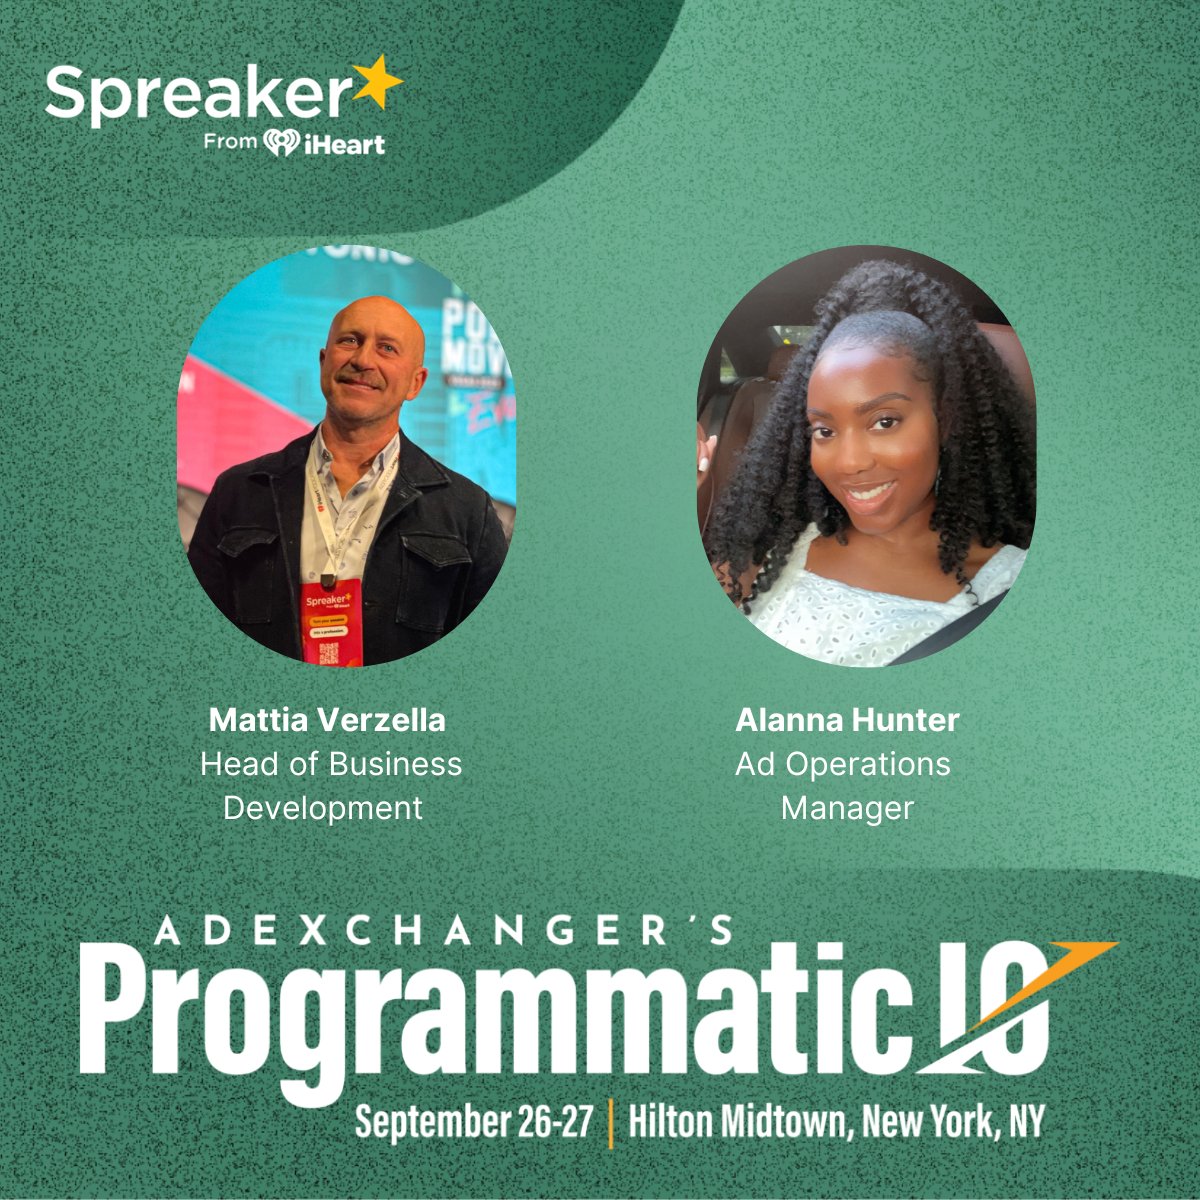 We're excited that team @spreaker  will be attending Programmatic I/O, and we can't wait to connect with you. Are you attending too? We'd love to meet up! We look forward to catching up with familiar faces and forging new connections. See you there! #PodcastAdvertising